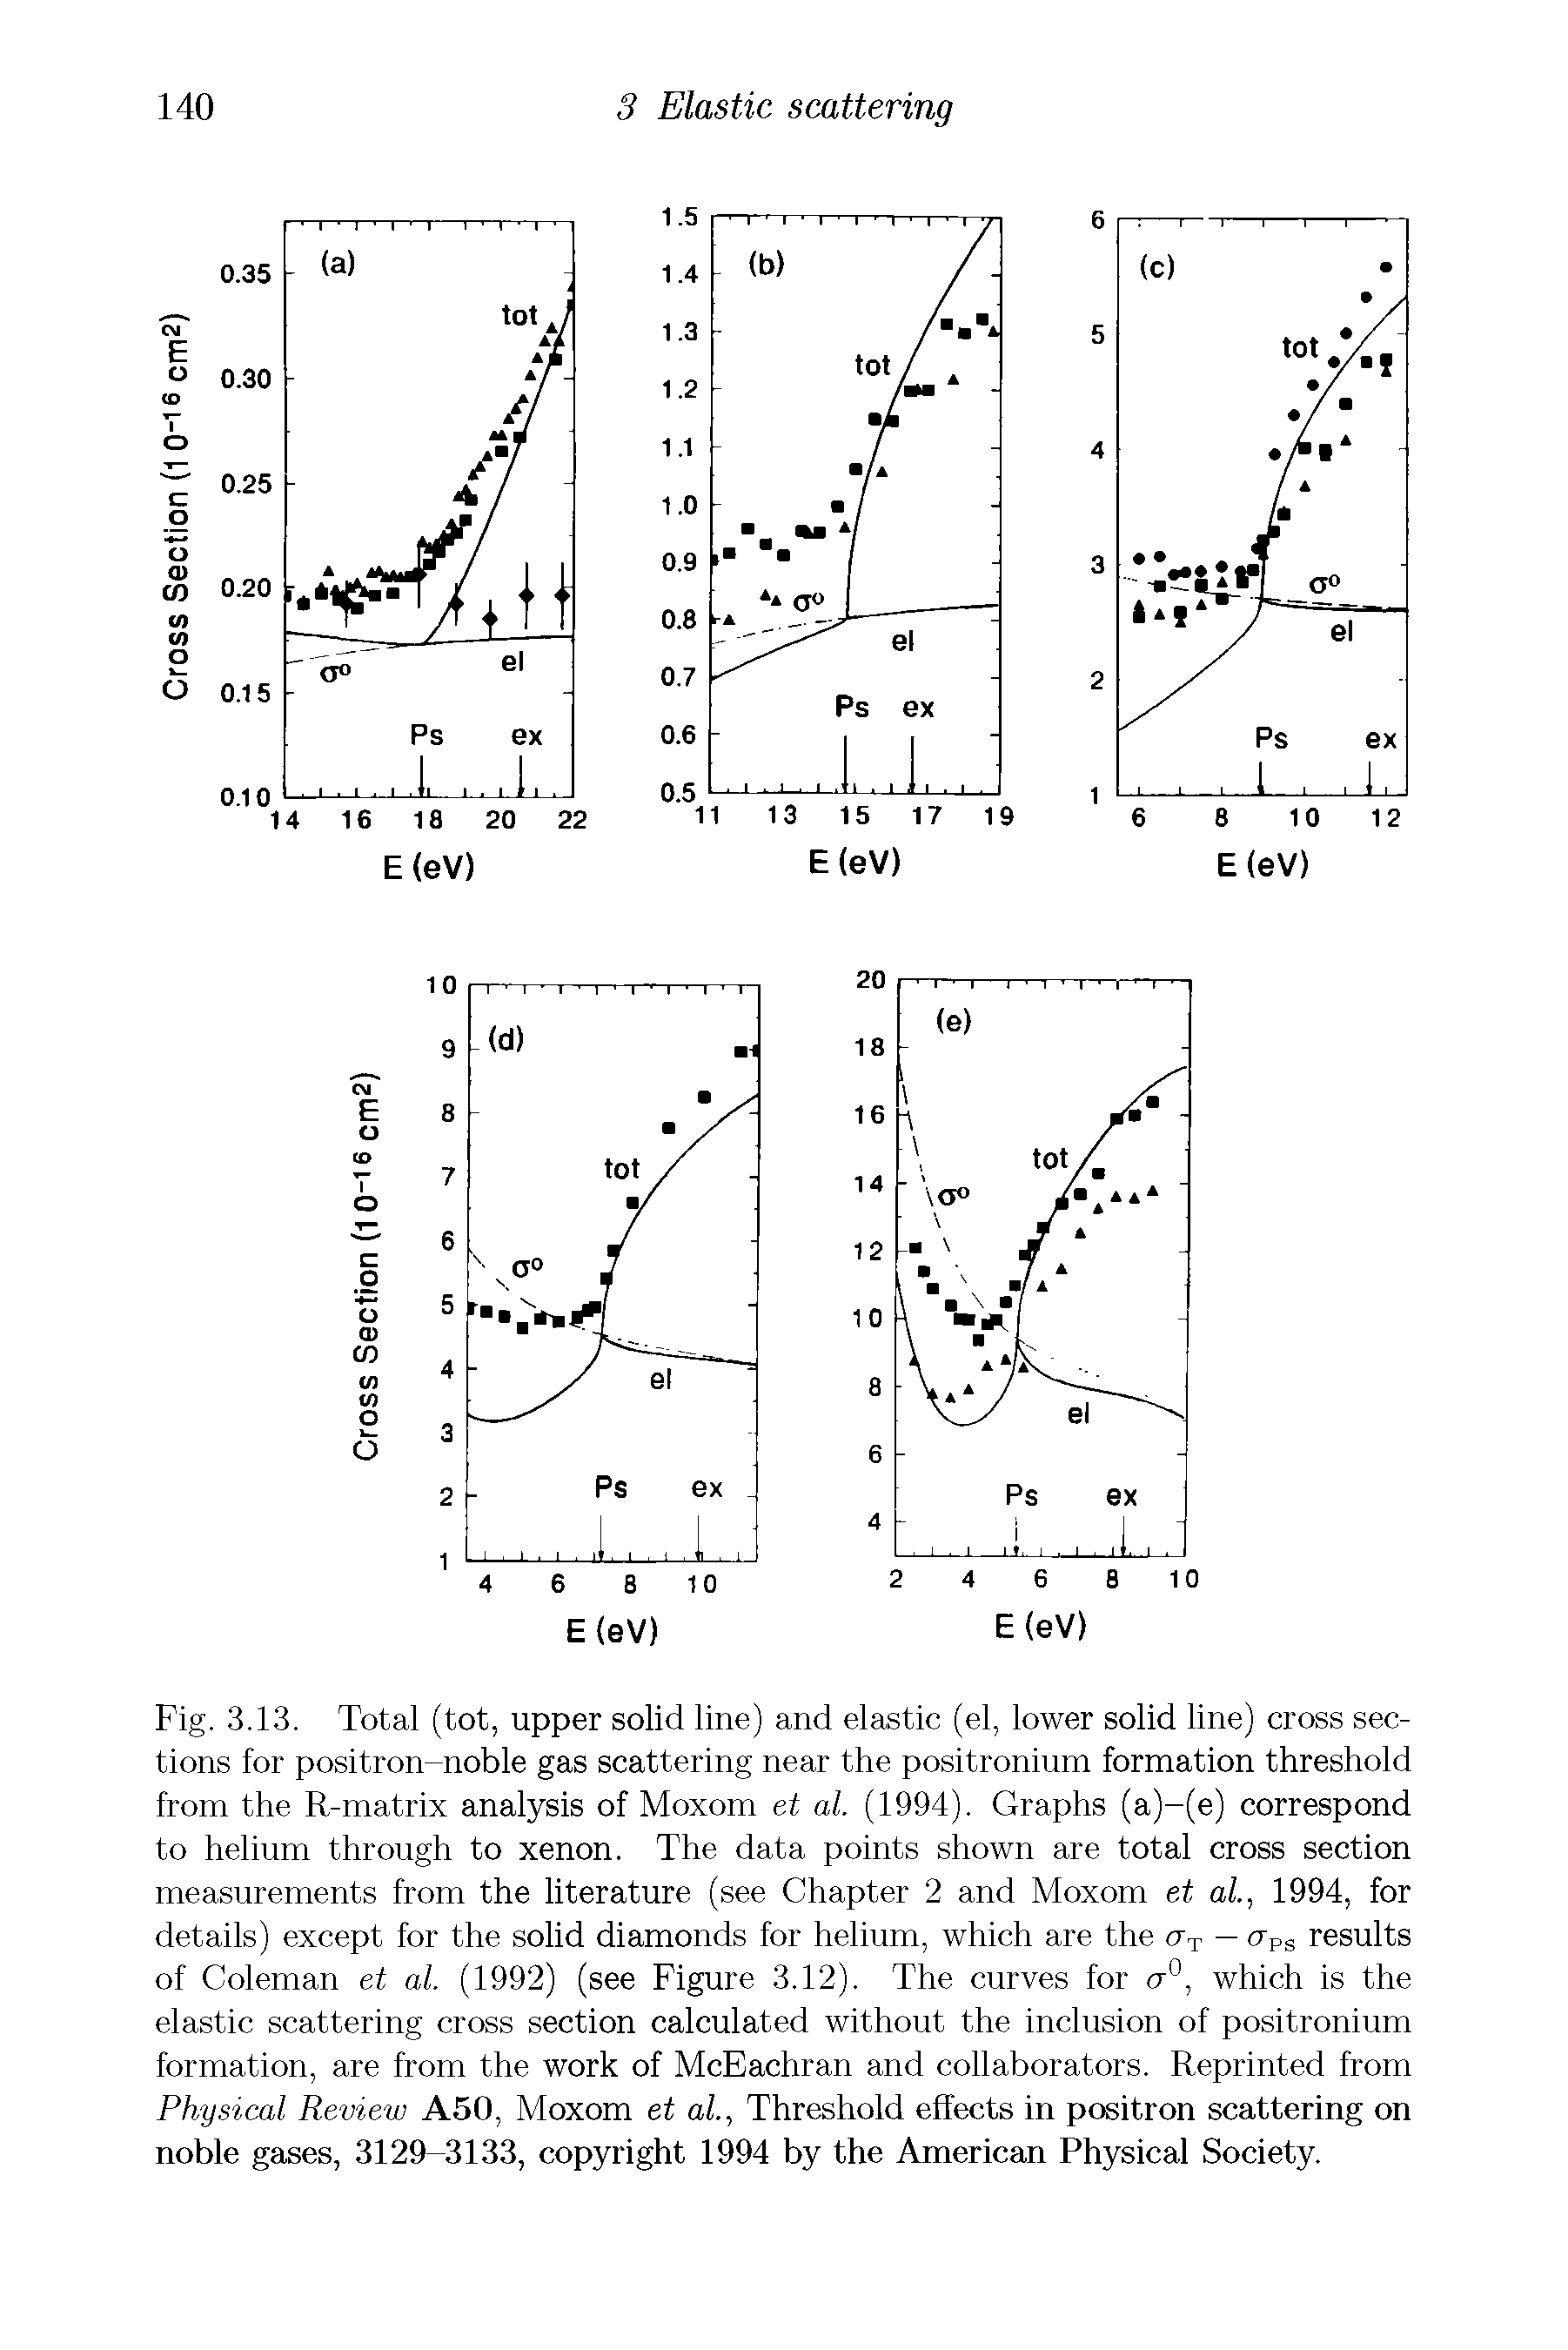 Fig. 3.13. Total (tot, upper solid line) and elastic (el, lower solid line) cross sections for positron-noble gas scattering near the positronium formation threshold from the R-matrix analysis of Moxom et al. (1994). Graphs (a)-(e) correspond to helium through to xenon. The data points shown are total cross section measurements from the literature (see Chapter 2 and Moxom et al., 1994, for details) except for the solid diamonds for helium, which are the <rT — <rPS results of Coleman et al. (1992) (see Figure 3.12). The curves for <r°, which is the elastic scattering cross section calculated without the inclusion of positronium formation, are from the work of McEachran and collaborators. Reprinted from Physical Review A50, Moxom et al., Threshold effects in positron scattering on noble gases, 3129-3133, copyright 1994 by the American Physical Society.